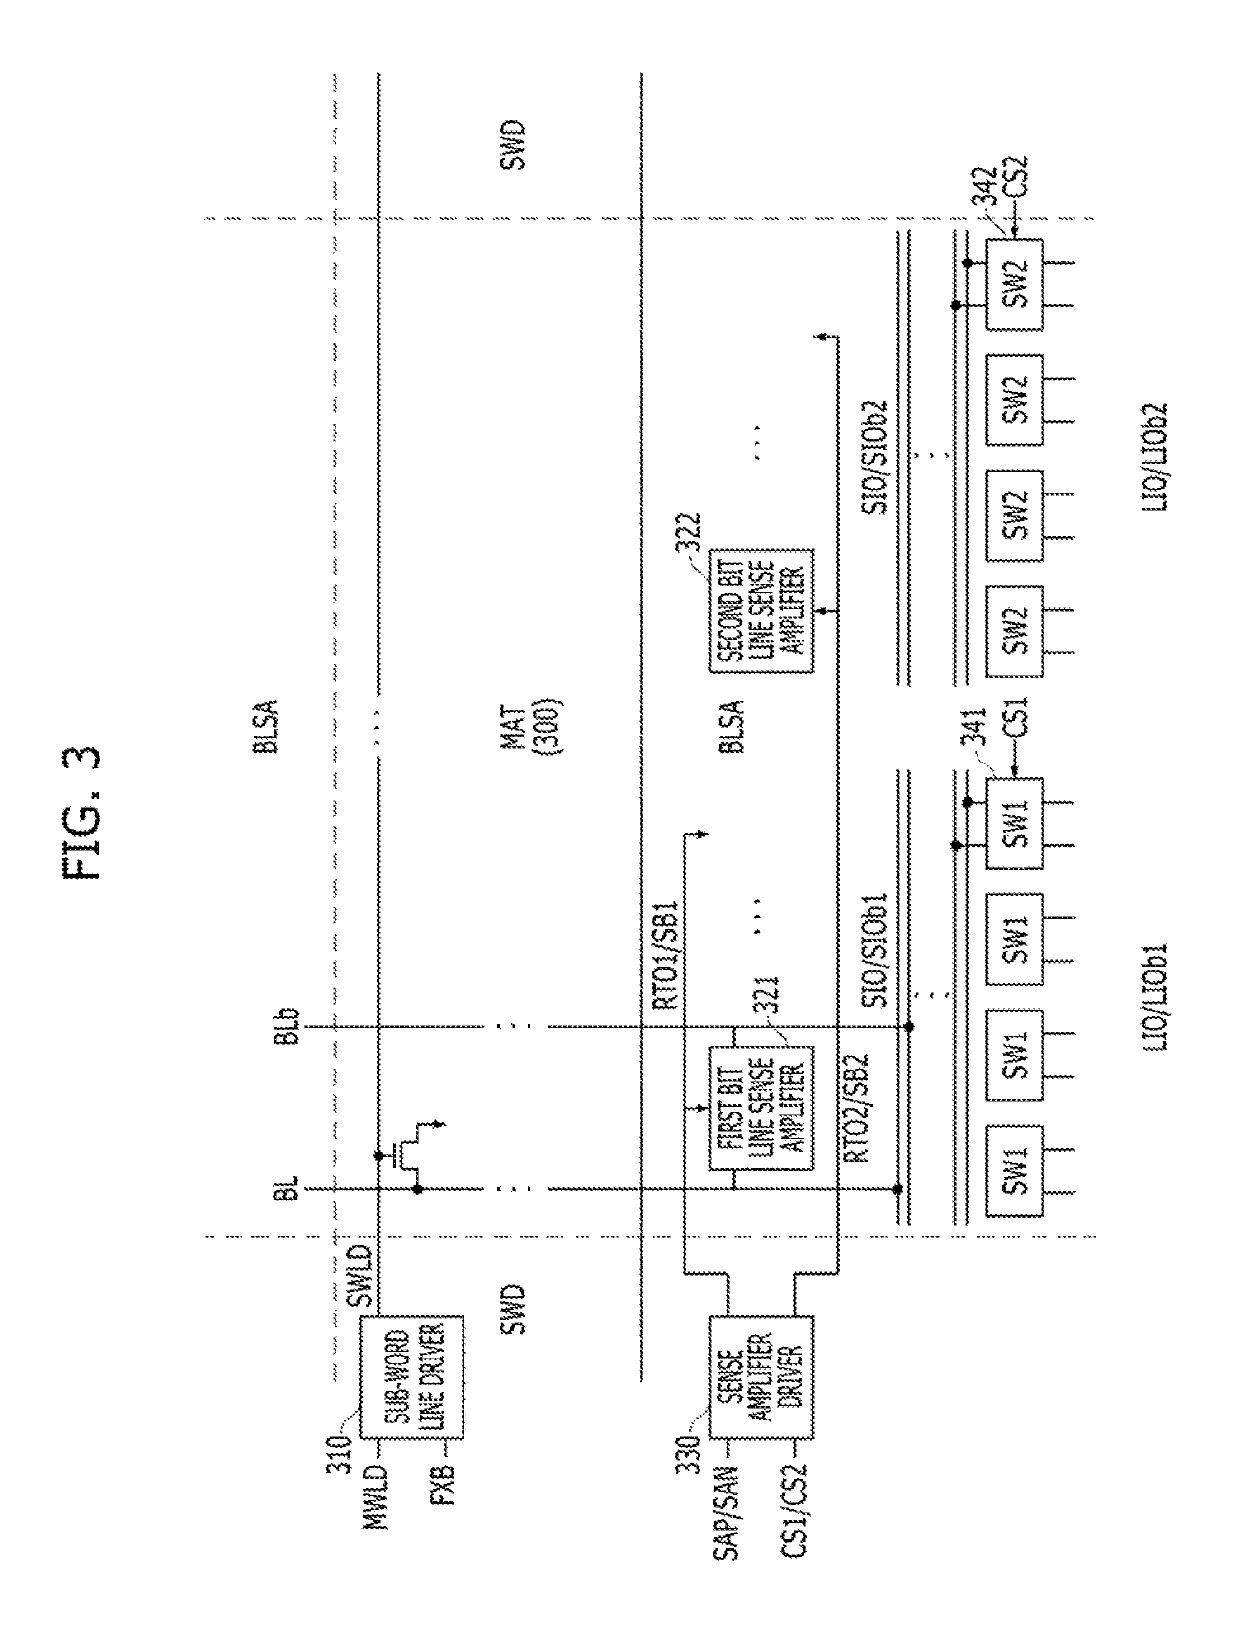 Semiconductor memory device, and signal line layout structure thereof